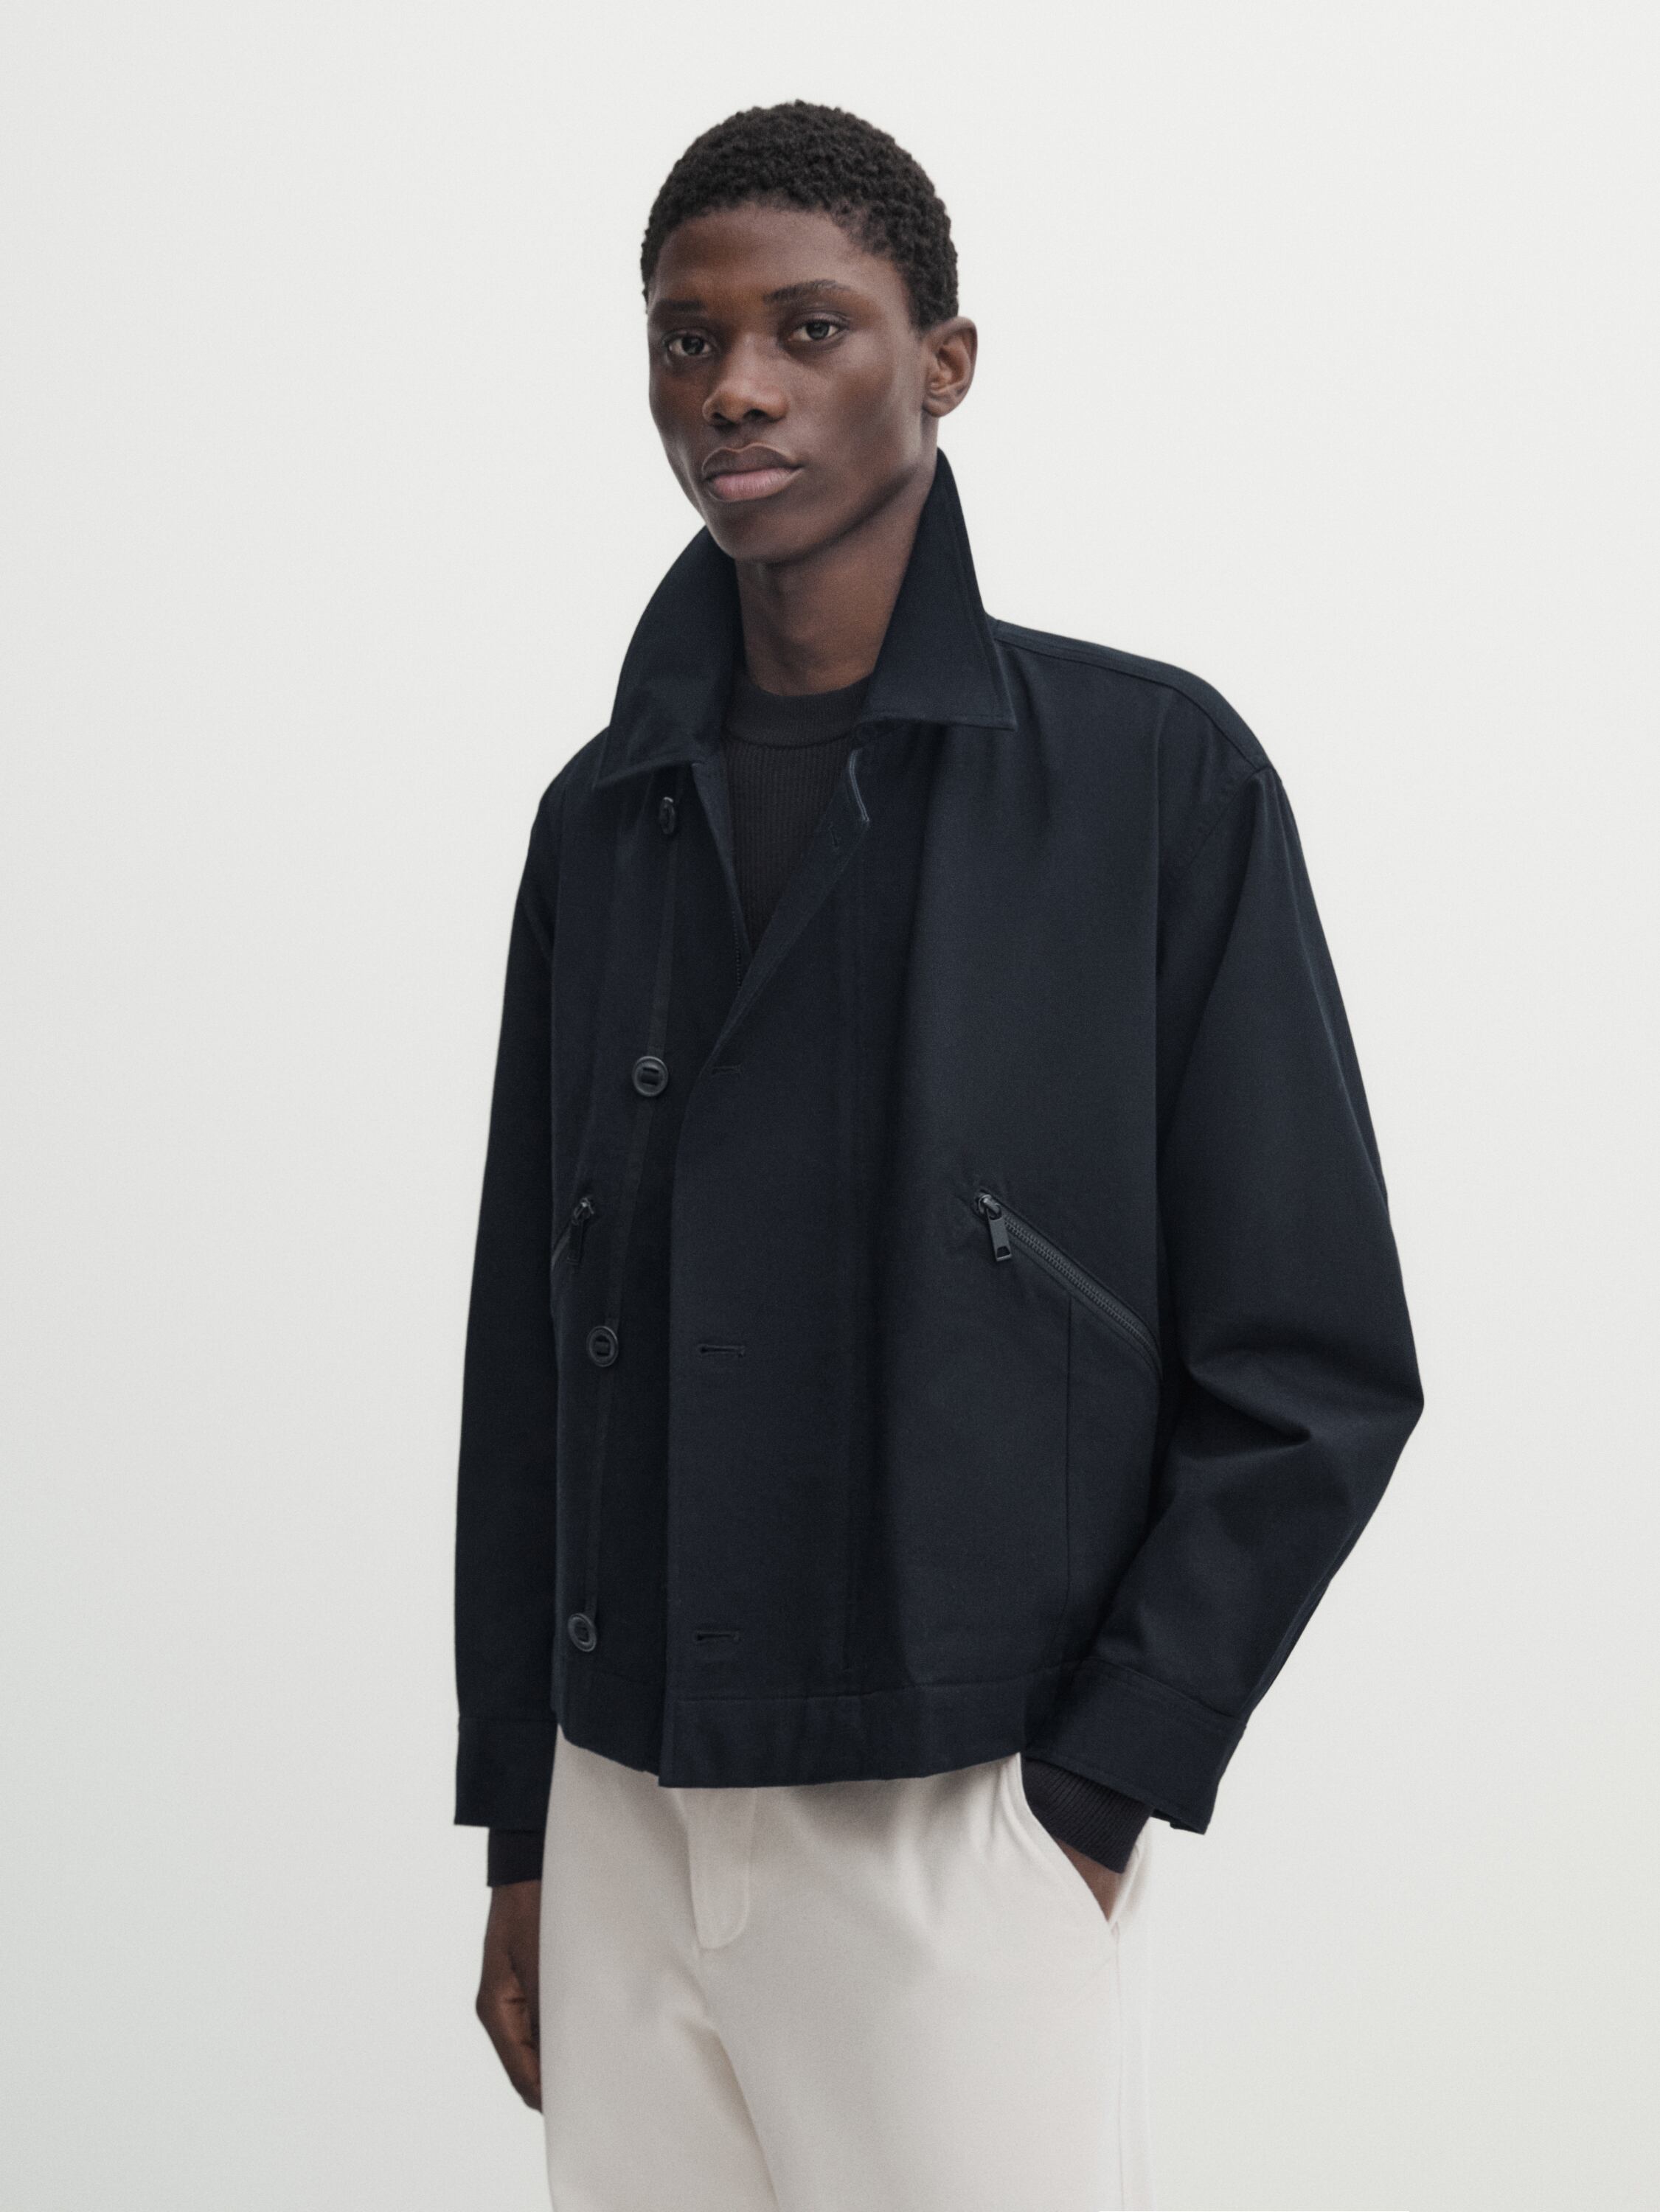 Double-breasted jacket with zip pockets - Studio